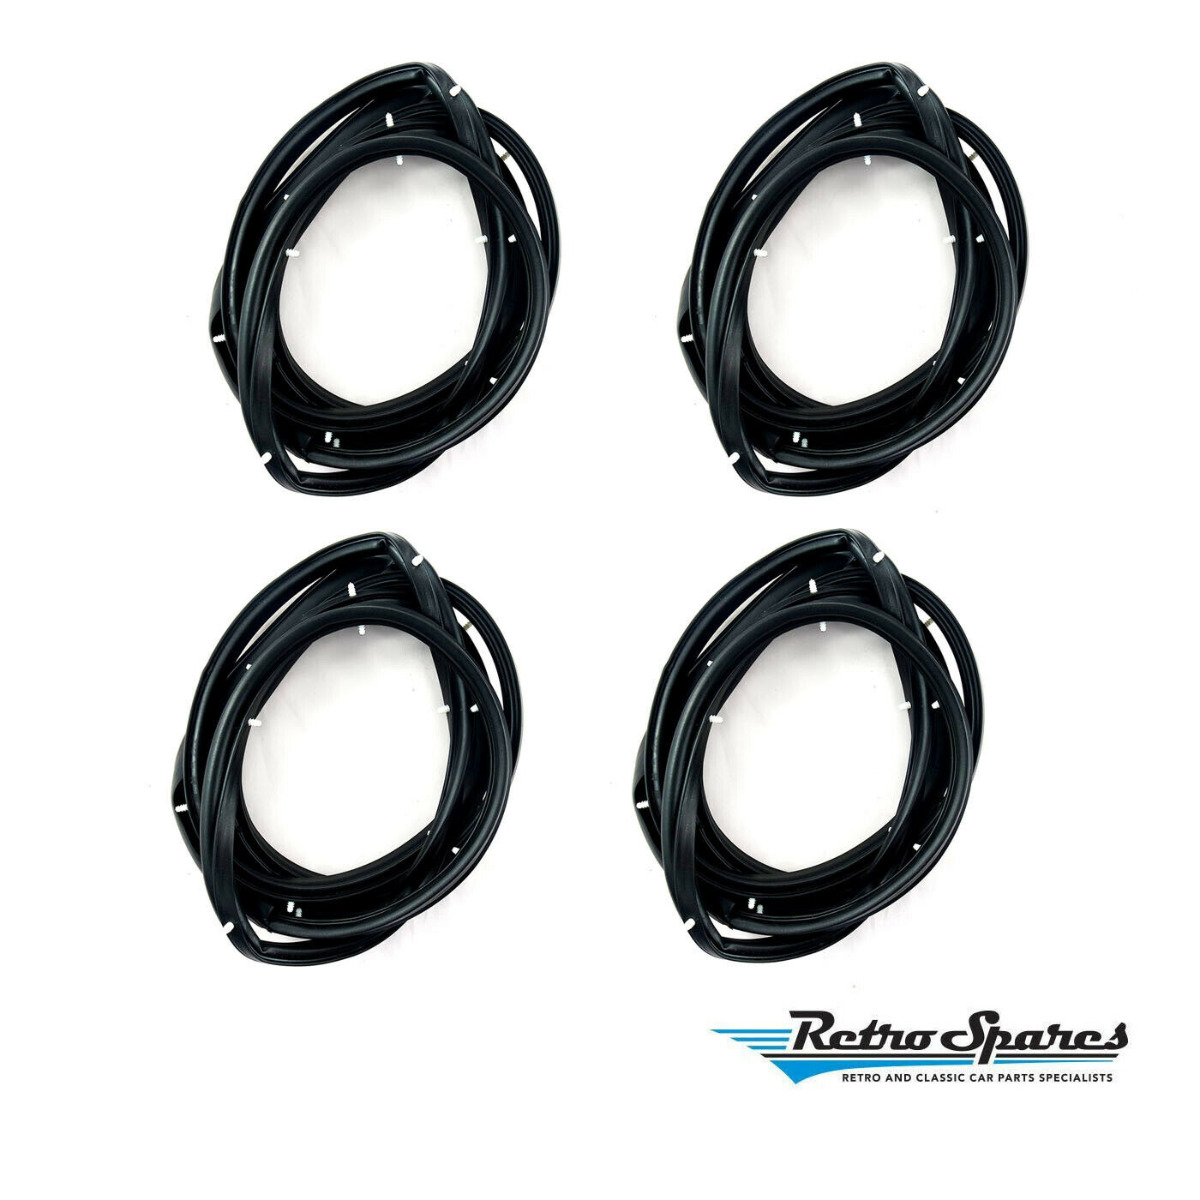 FRONT & REAR DOOR SEAL KIT FOR HOLDEN HD-HG